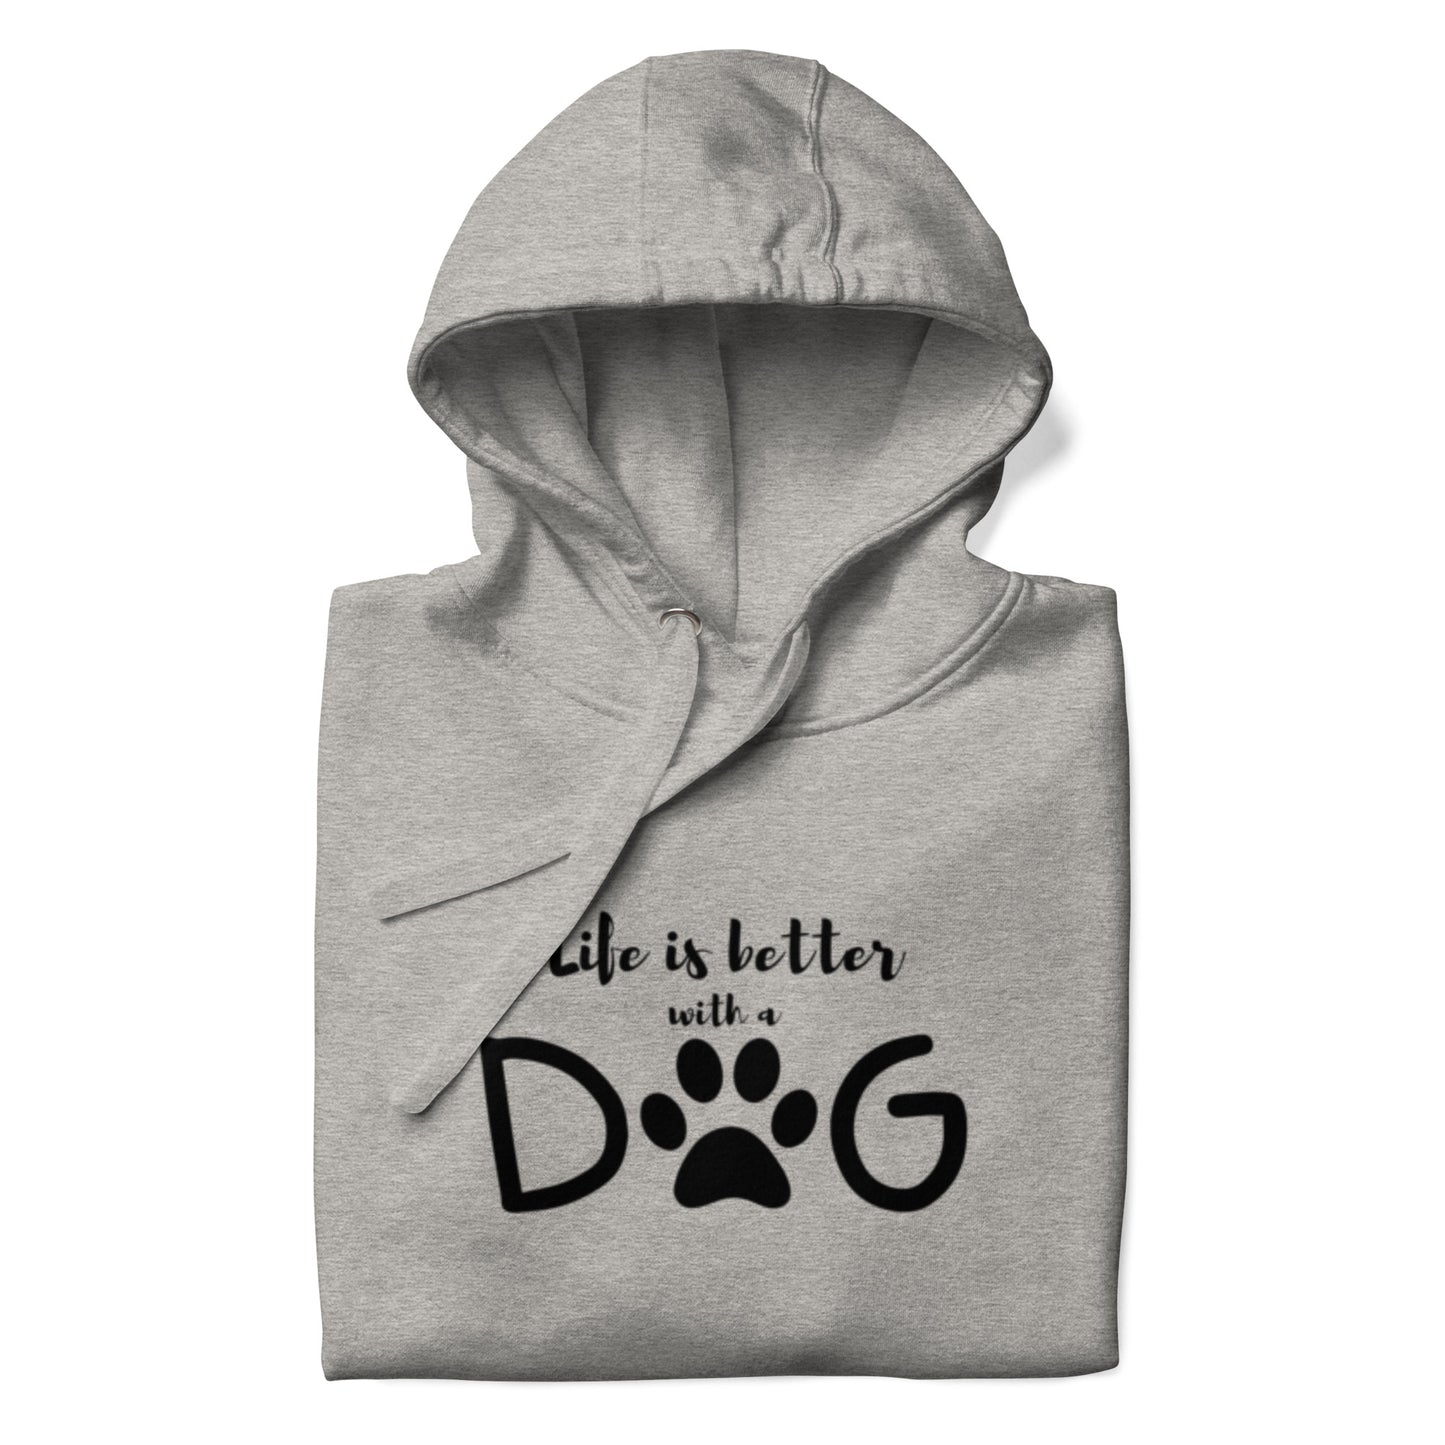 Life is Better with a Dog - Hoodie